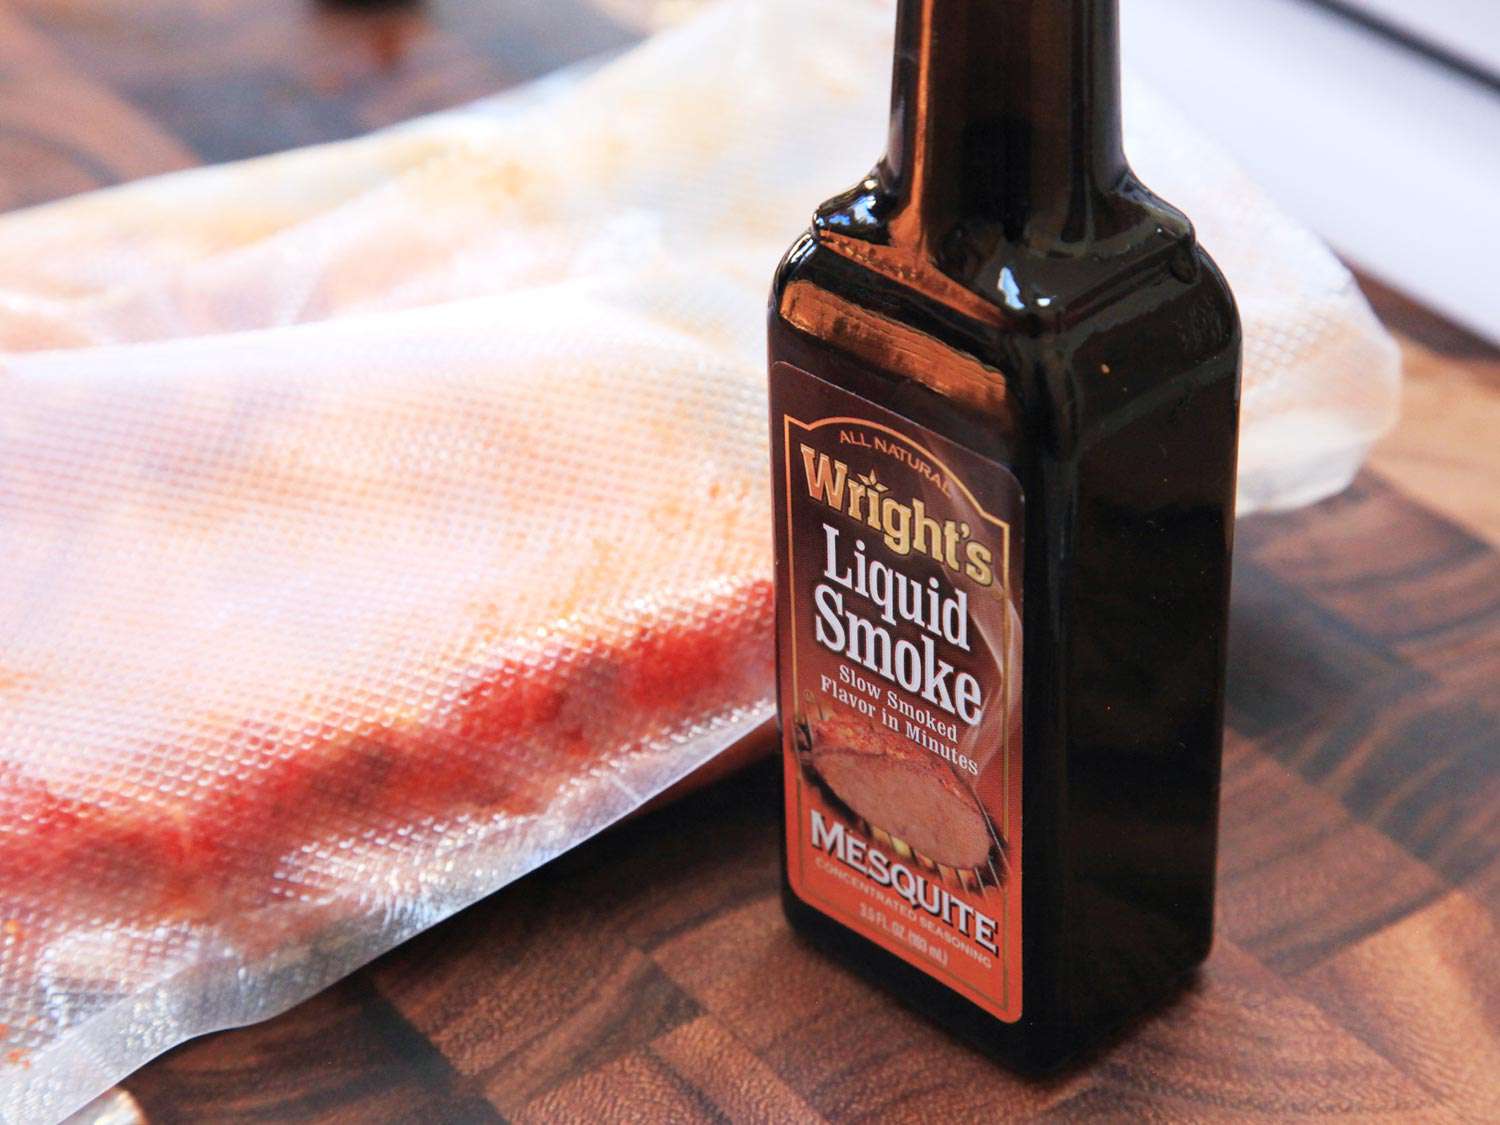 A bottle of Wright's liquid smoke next to a sous vide packet of meat.